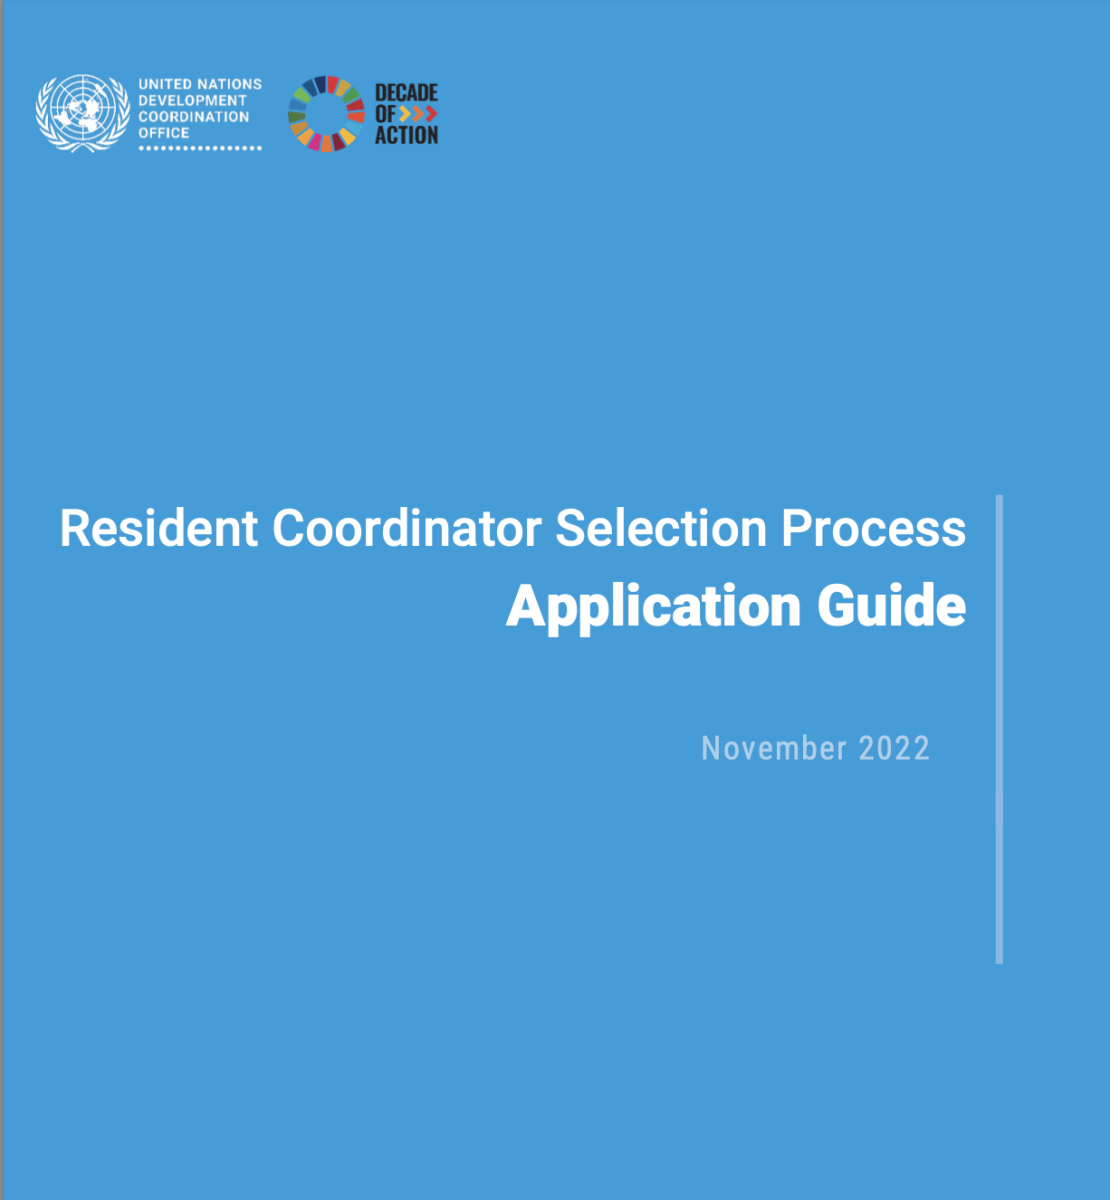 Publication cover in UN blue with the title "Resident Coordinator Selection process: application guide"